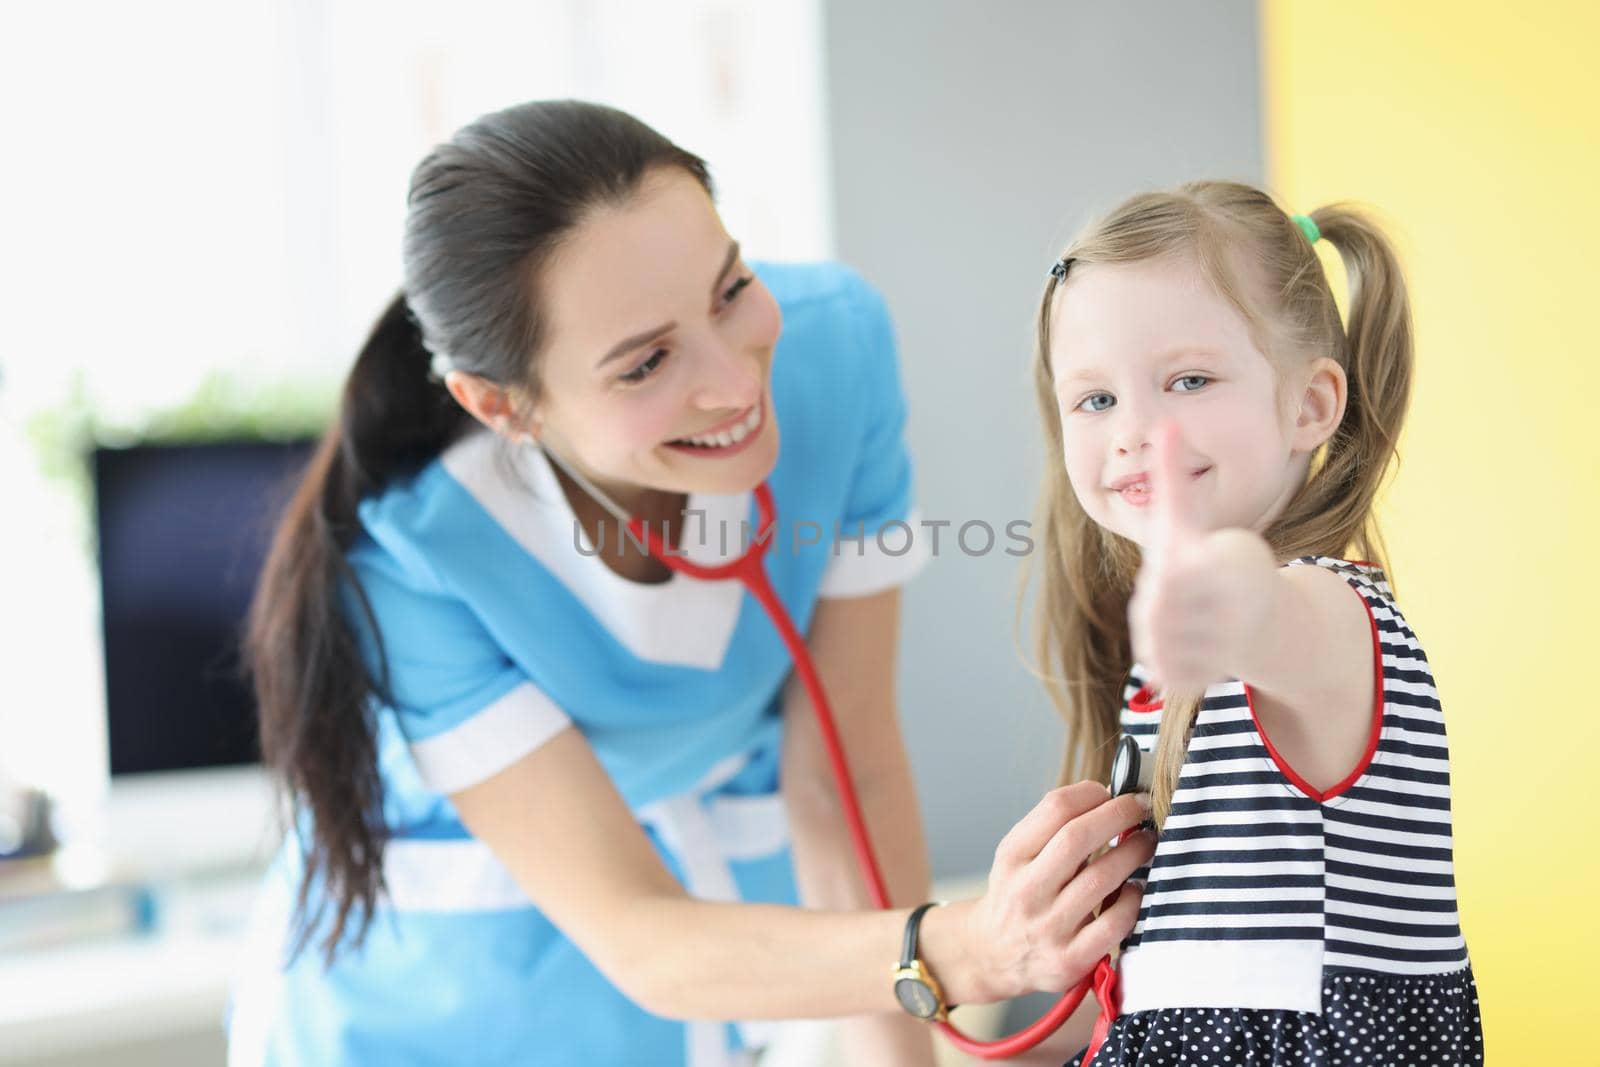 Portrait of girl being examined by pediatrician doctor, happy child show thumbs up gesture. Cheerful kid on checkup. Medicine, appointment, help concept